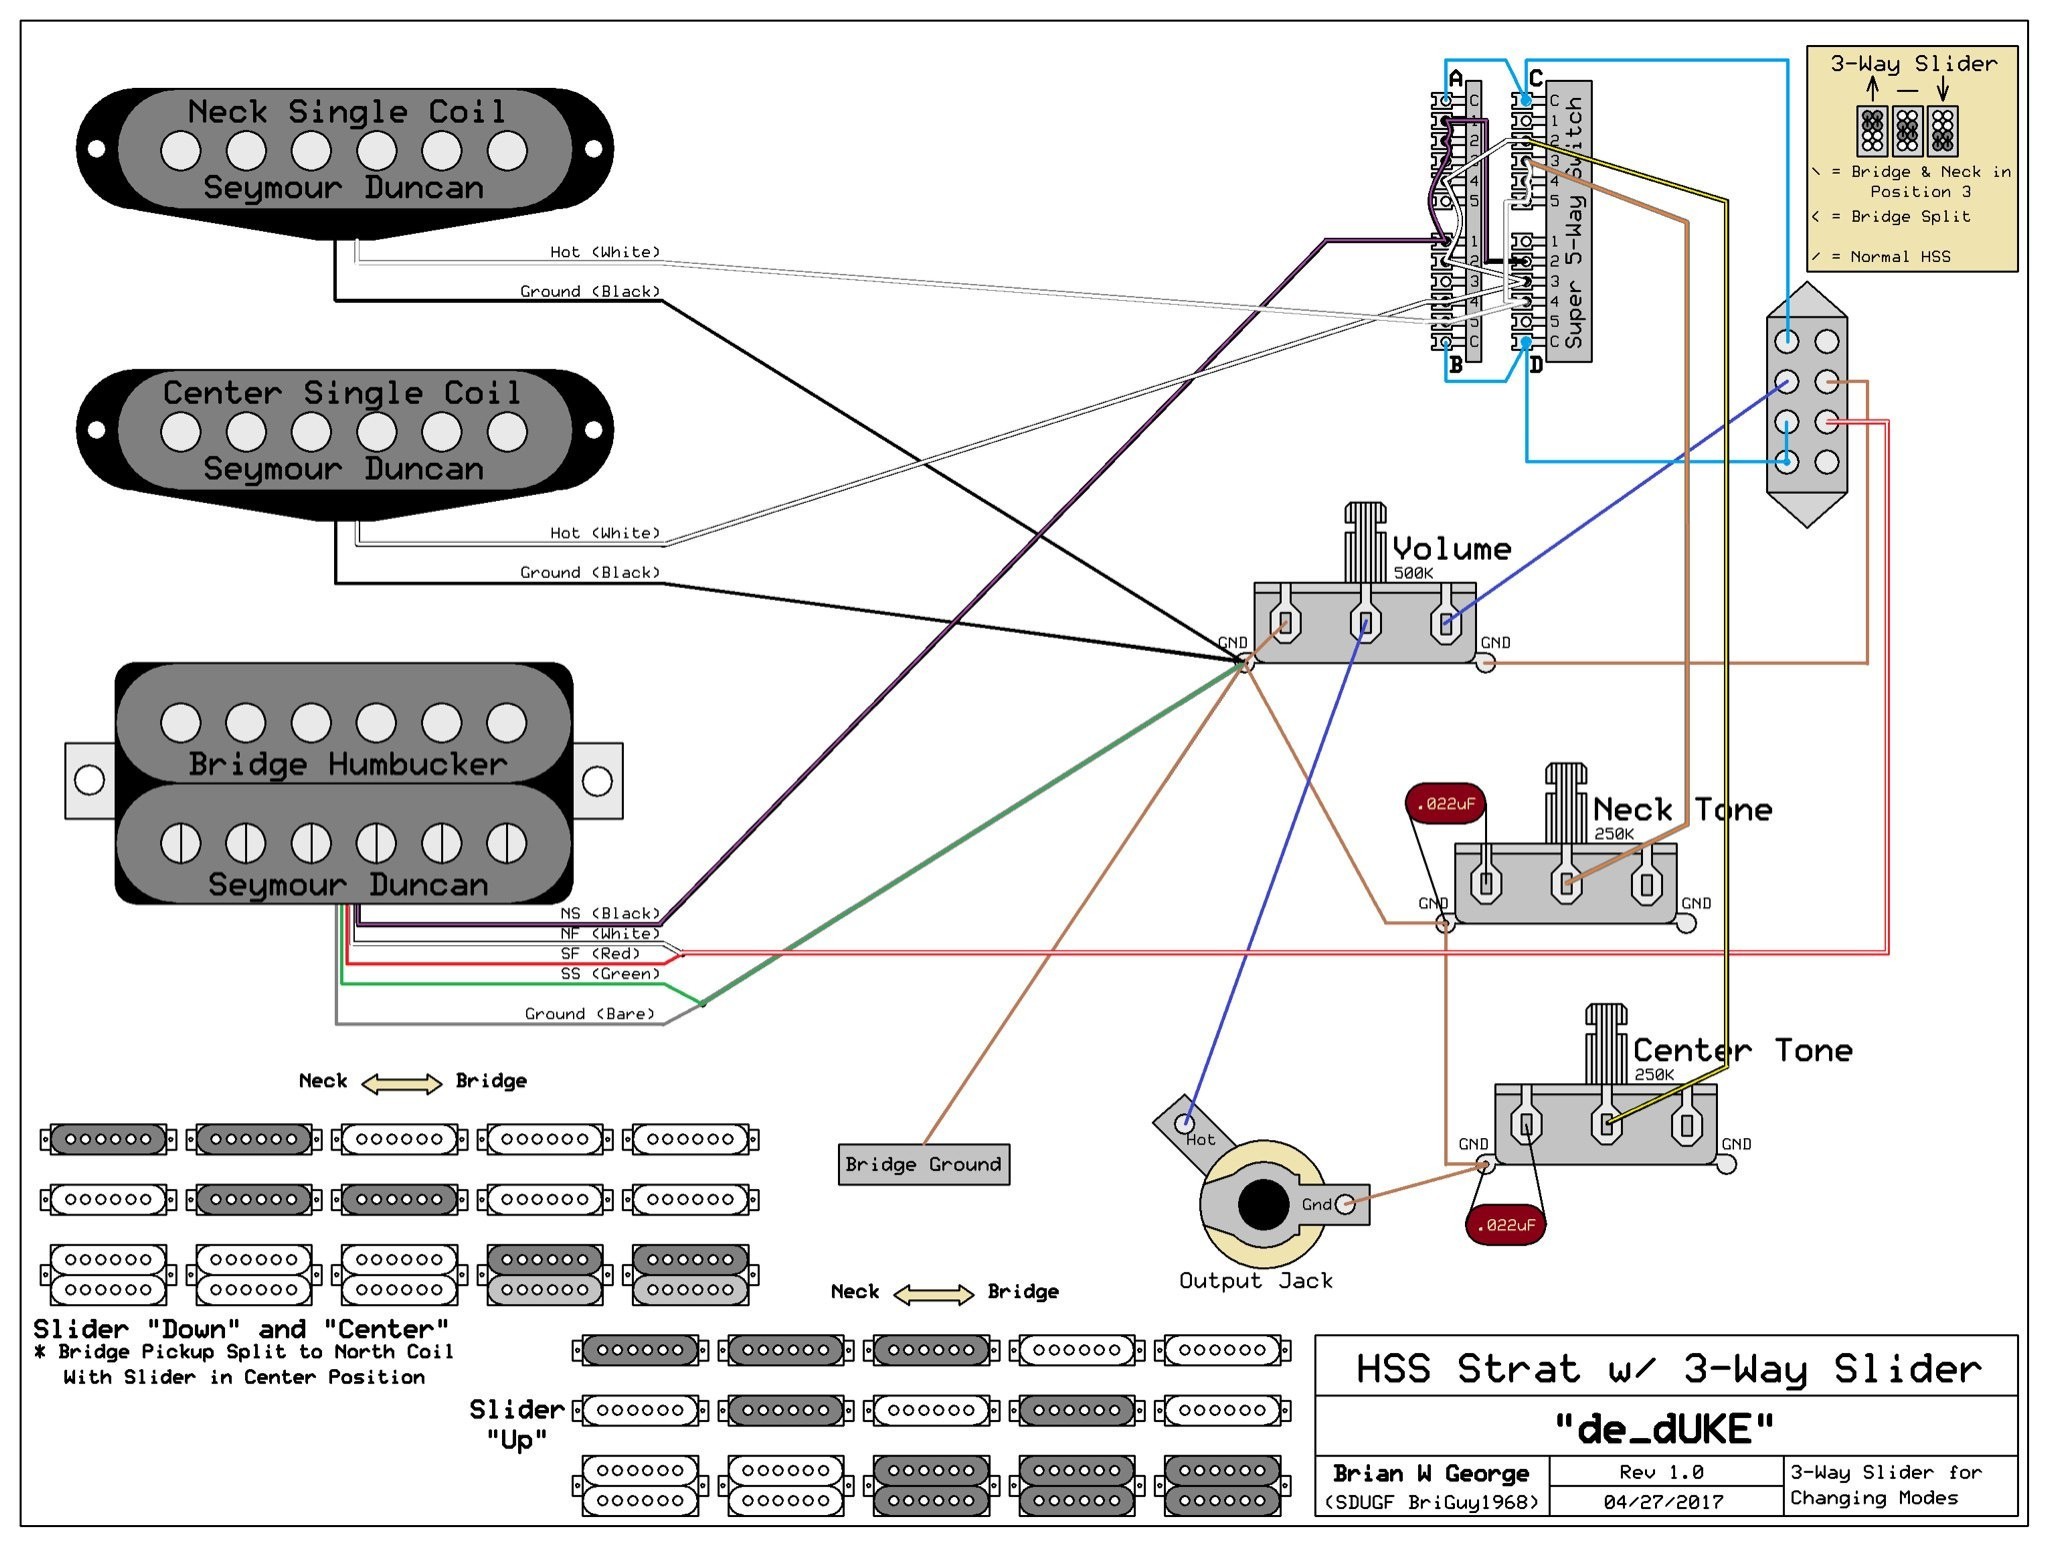 Wiring Diagram for Fender Stratocaster 5 Way Switch Refrence Wiring Diagram Fender Strat 5 Way Switch